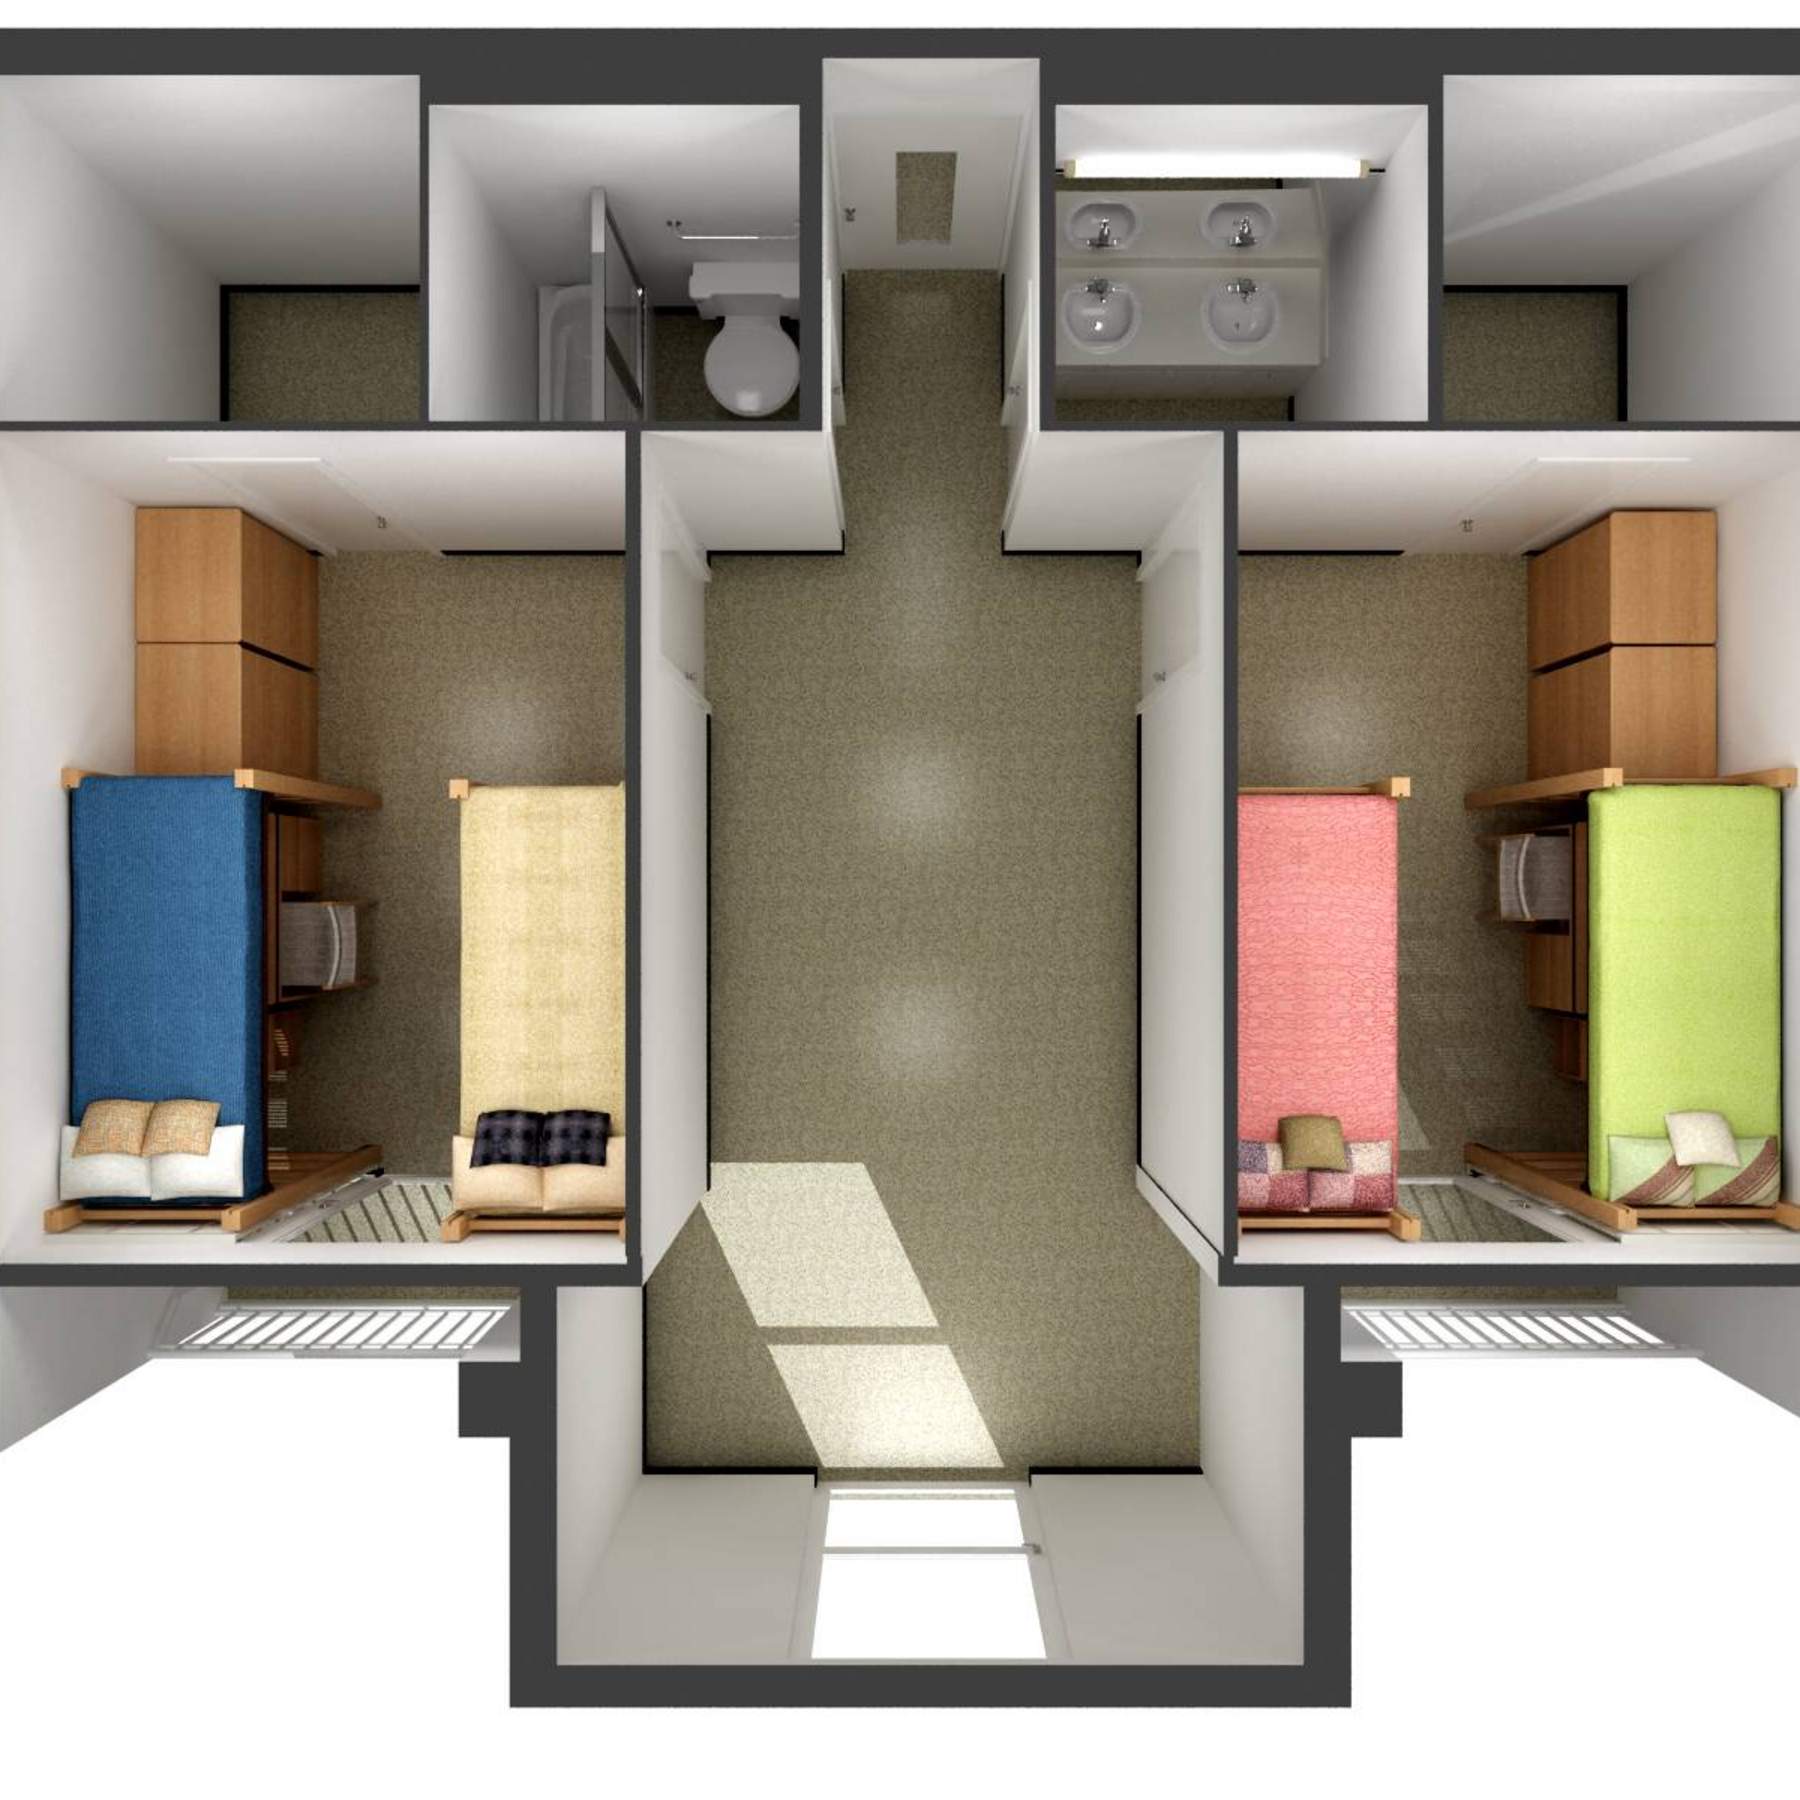 College Inn suite layout